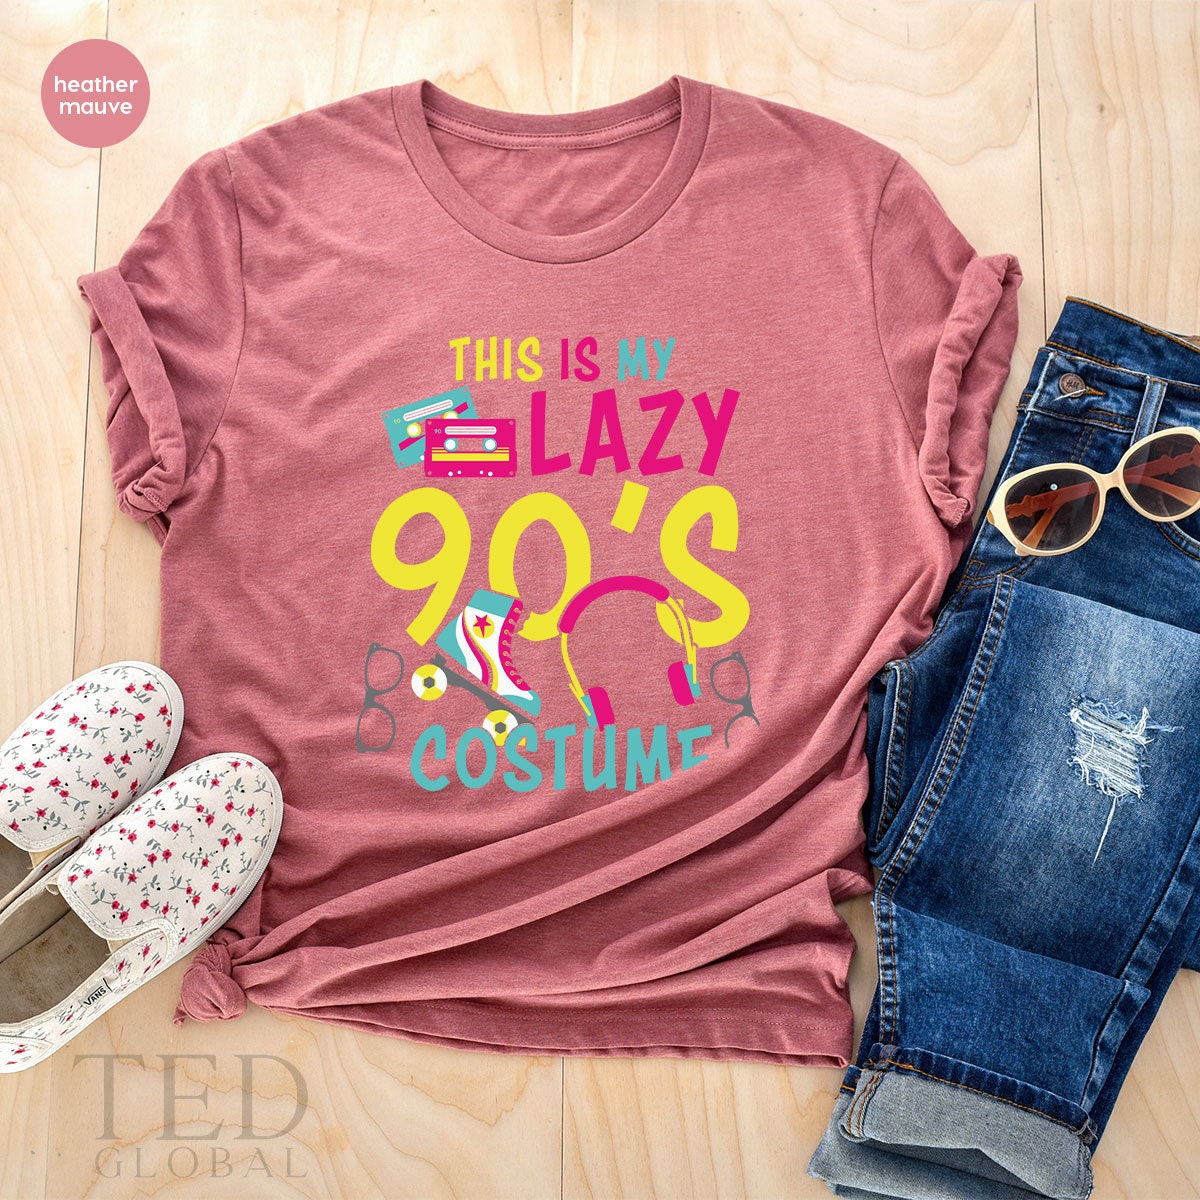 Cute Vintage Tape T-Shirt, This Is My Tape  Lazy 90's Costume Shirt, Historical Shirts, Funny 90's Music TShirt, Gift For 90's Birthday - Fastdeliverytees.com